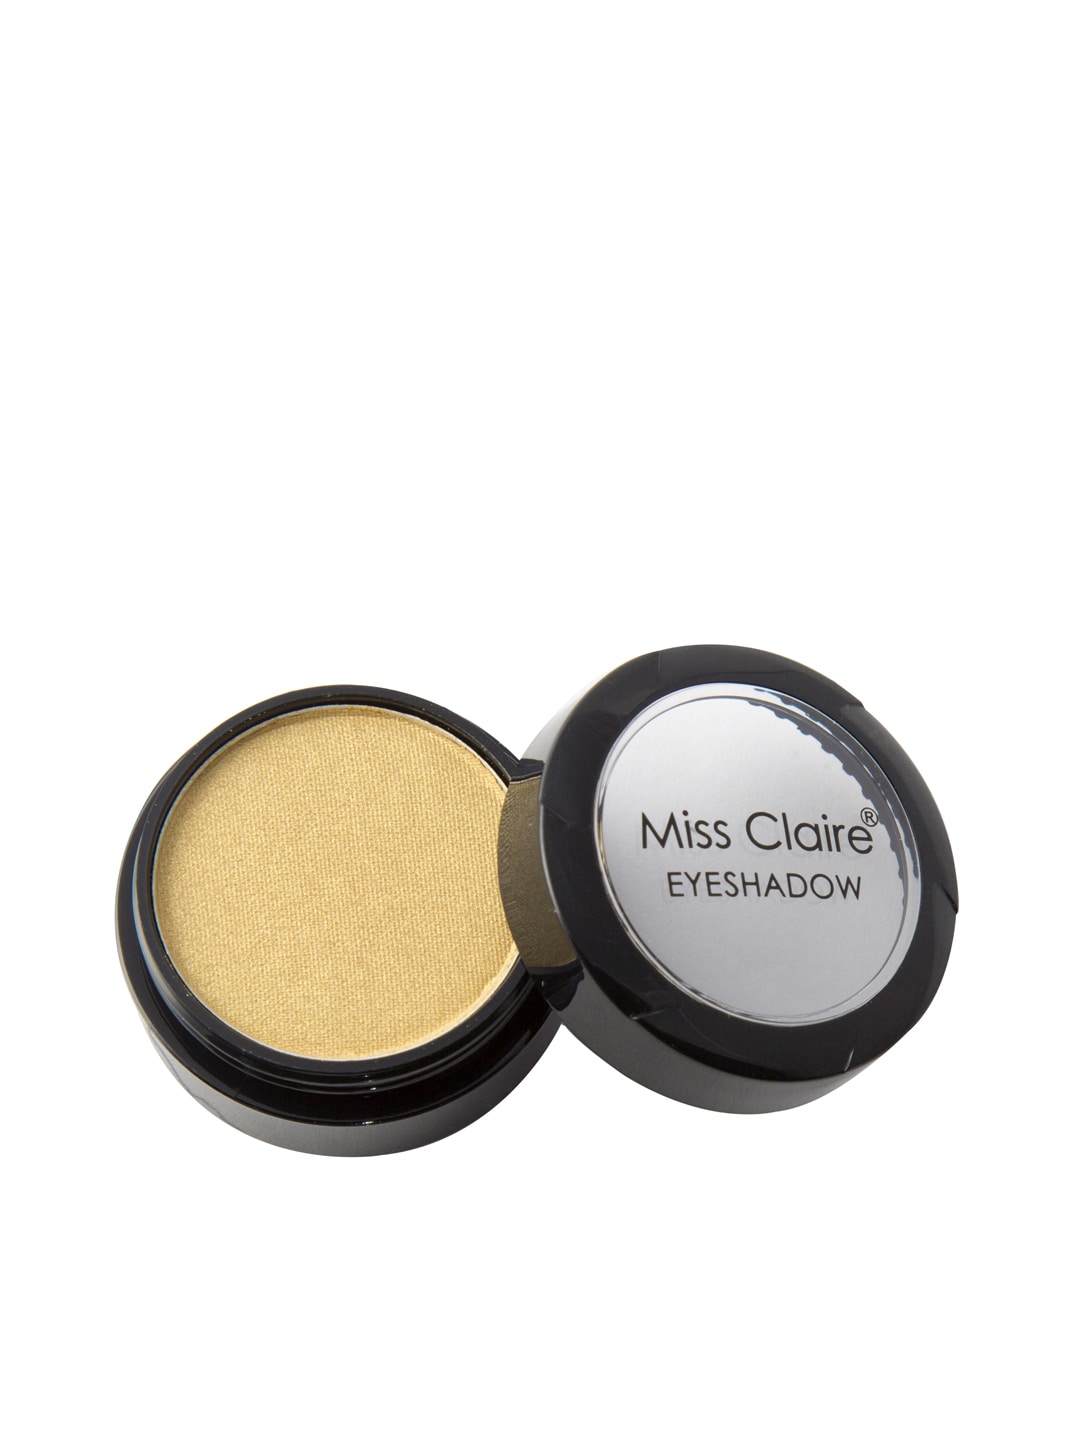 Miss Claire 0651 Single Eyeshadow Price in India